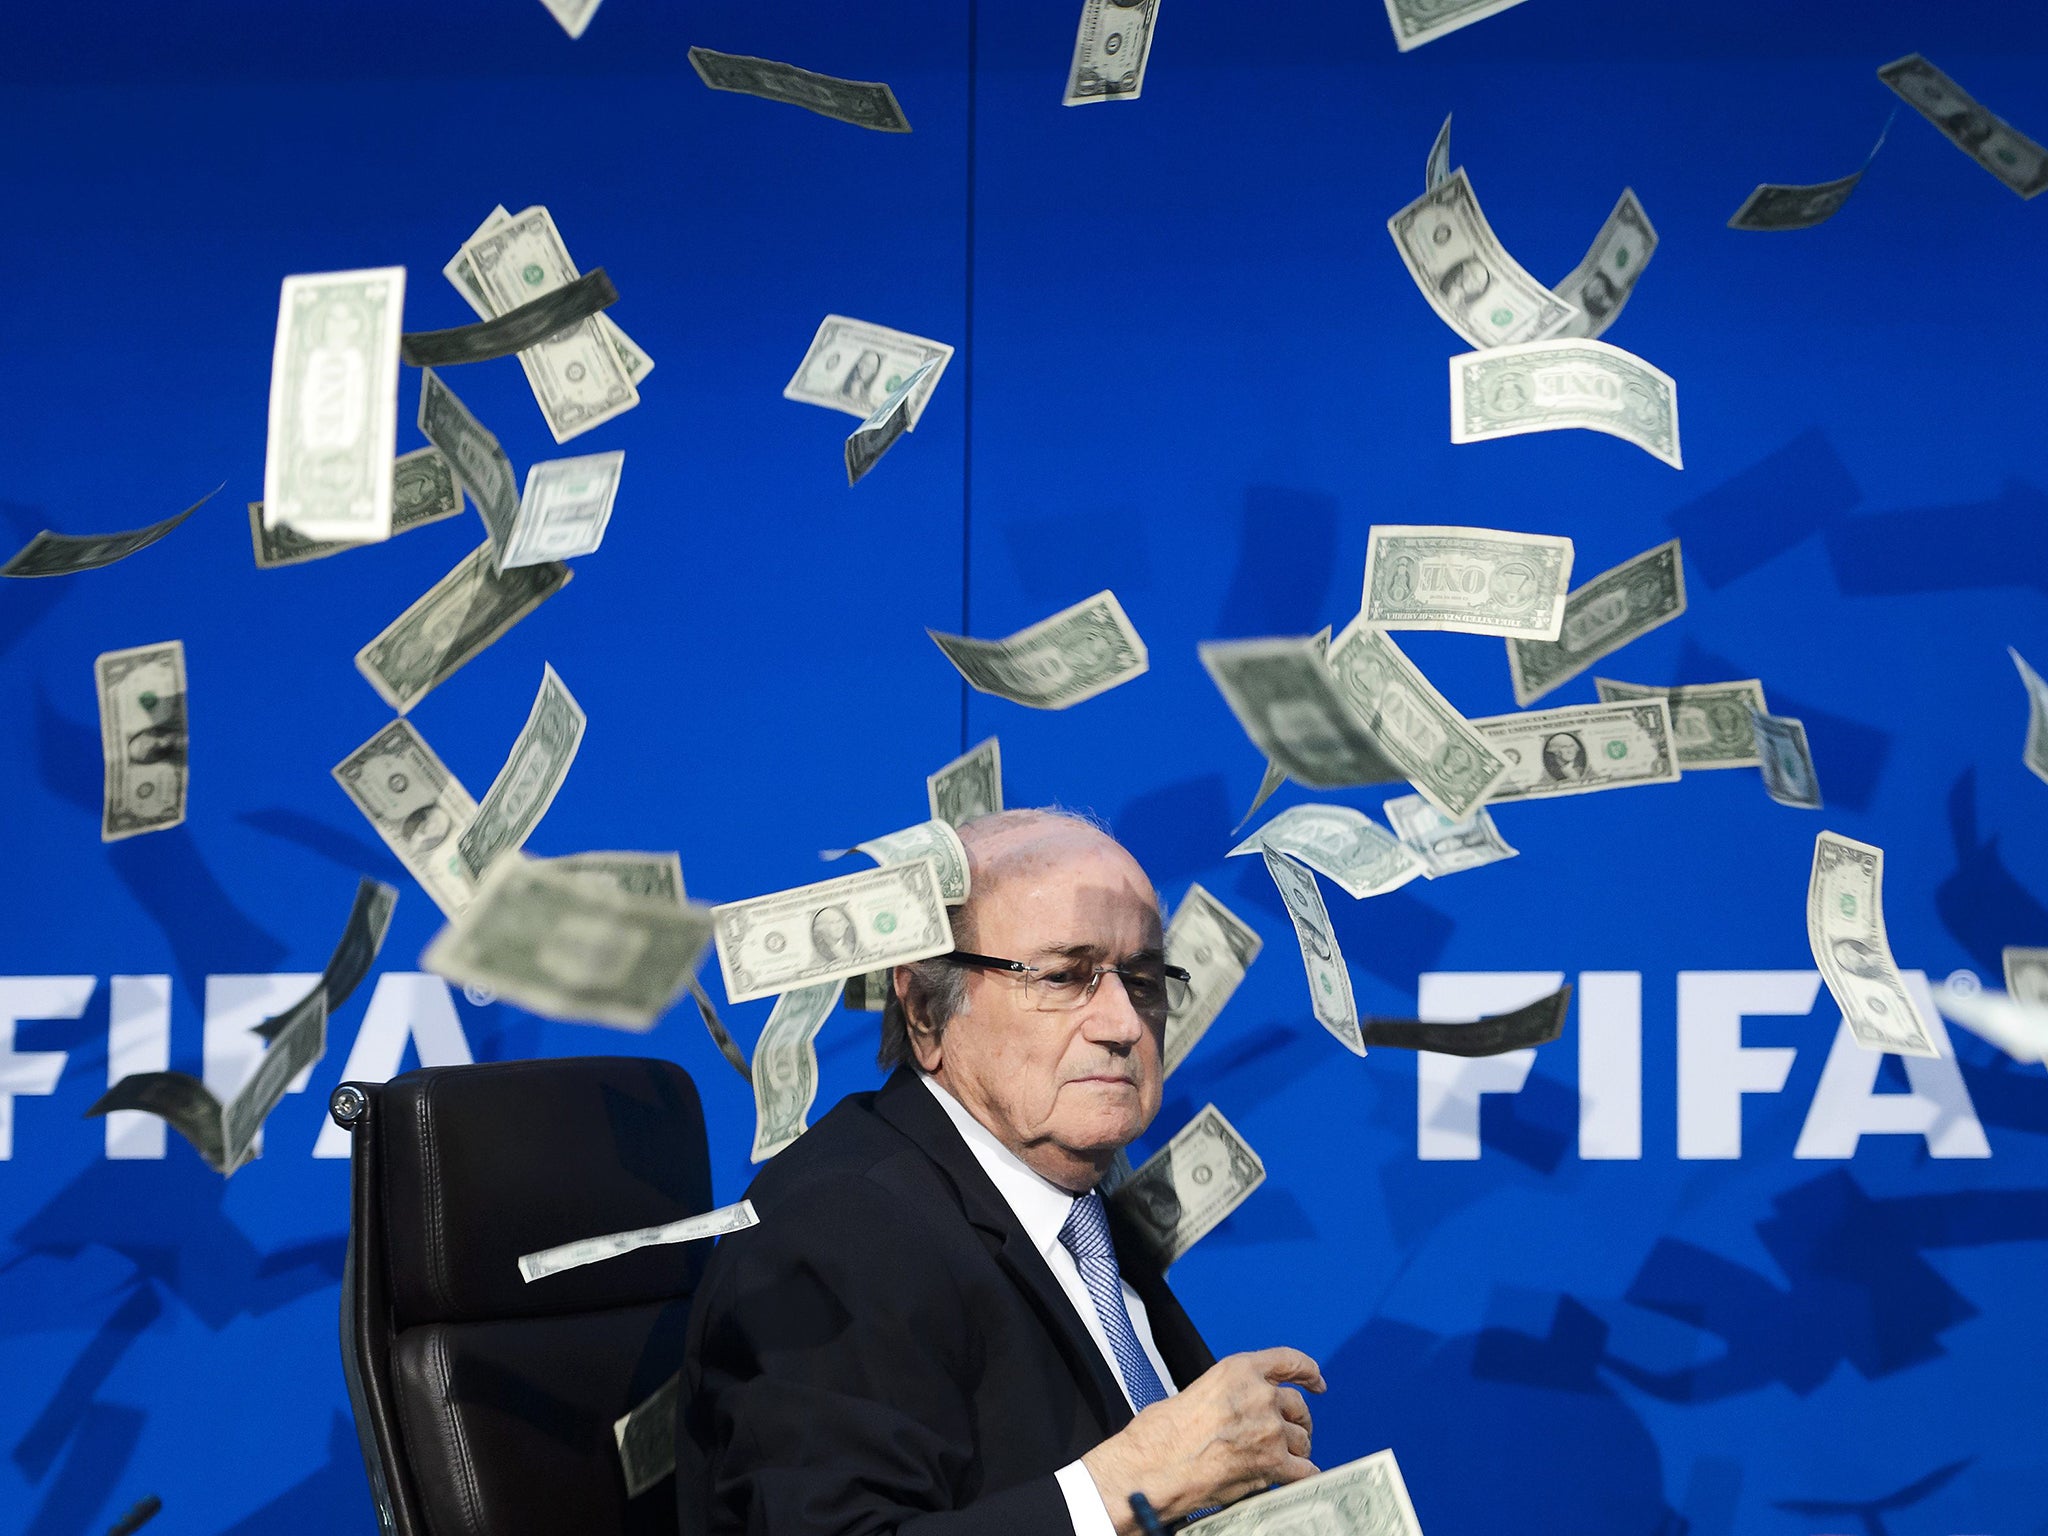 Blatter is showered in cash in a high-profile stunt at Fifa HQ in Zurich